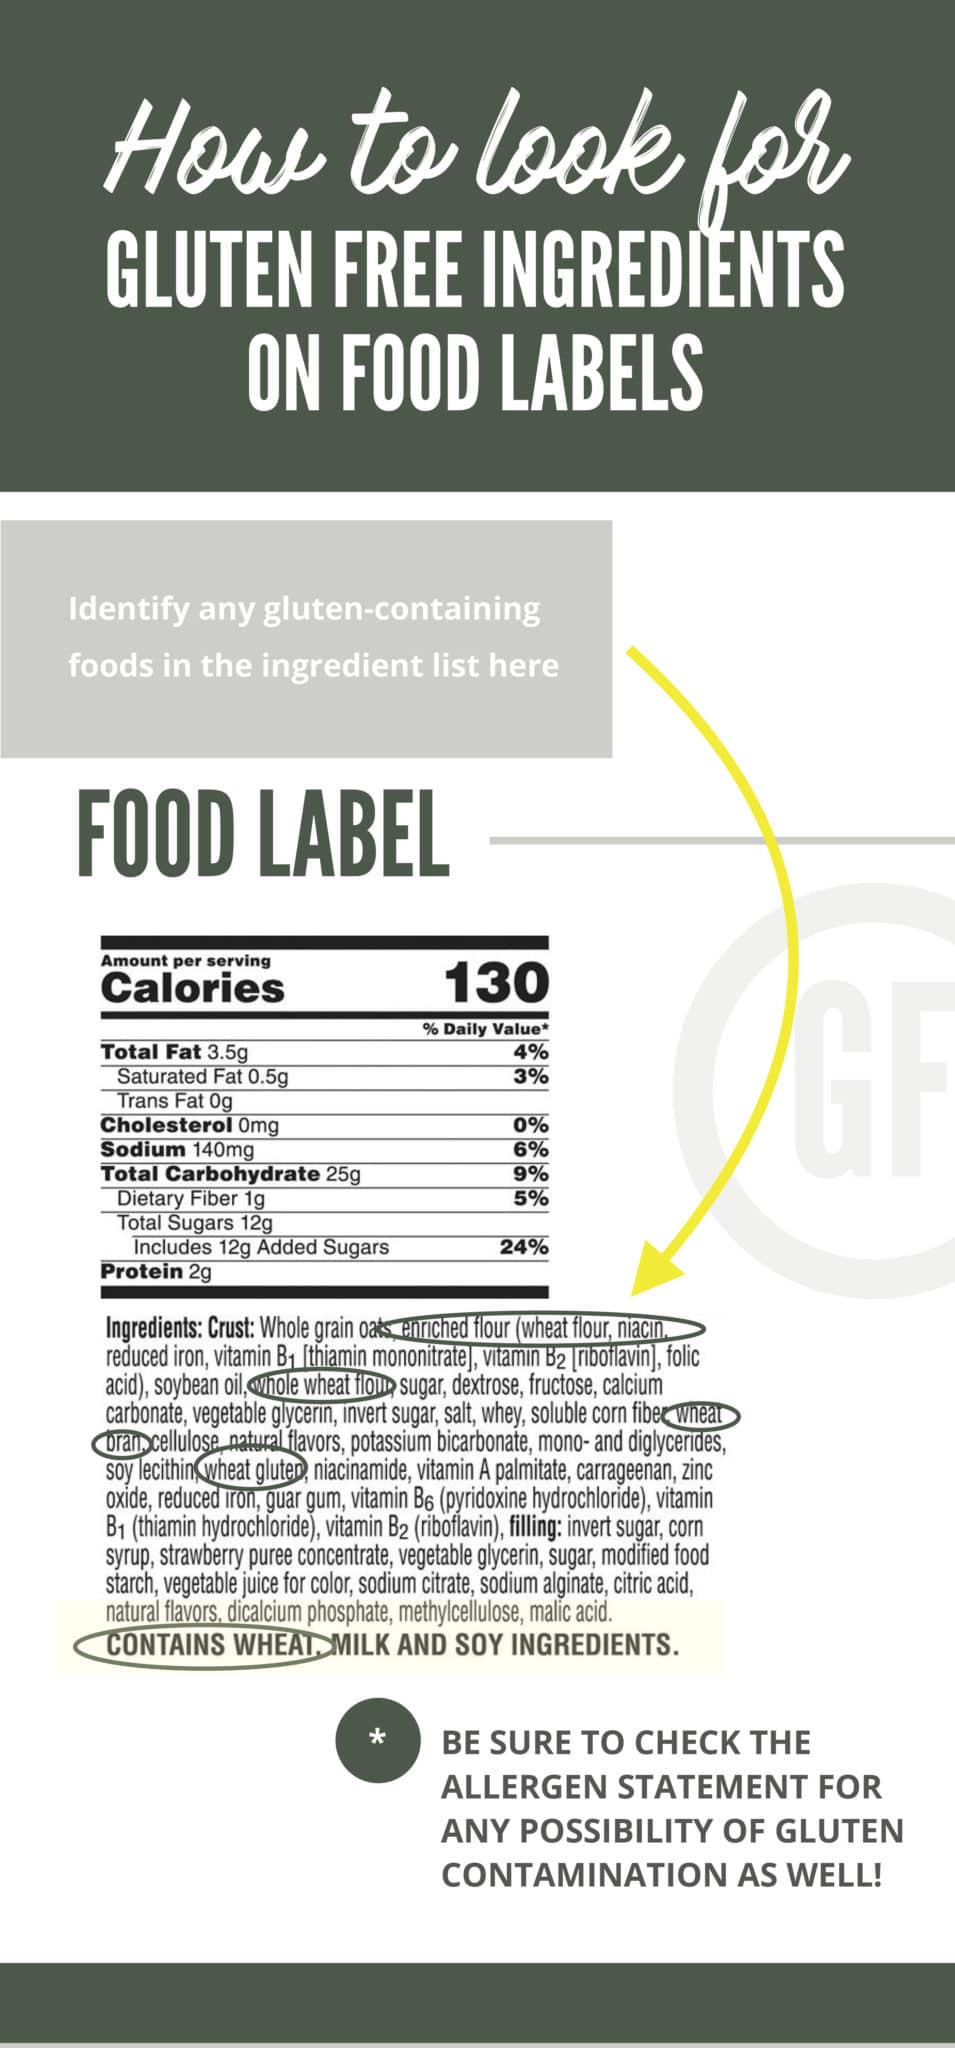 gluten free holiday shopping guide showing how to read ingredient lists for gluten free ingredients.